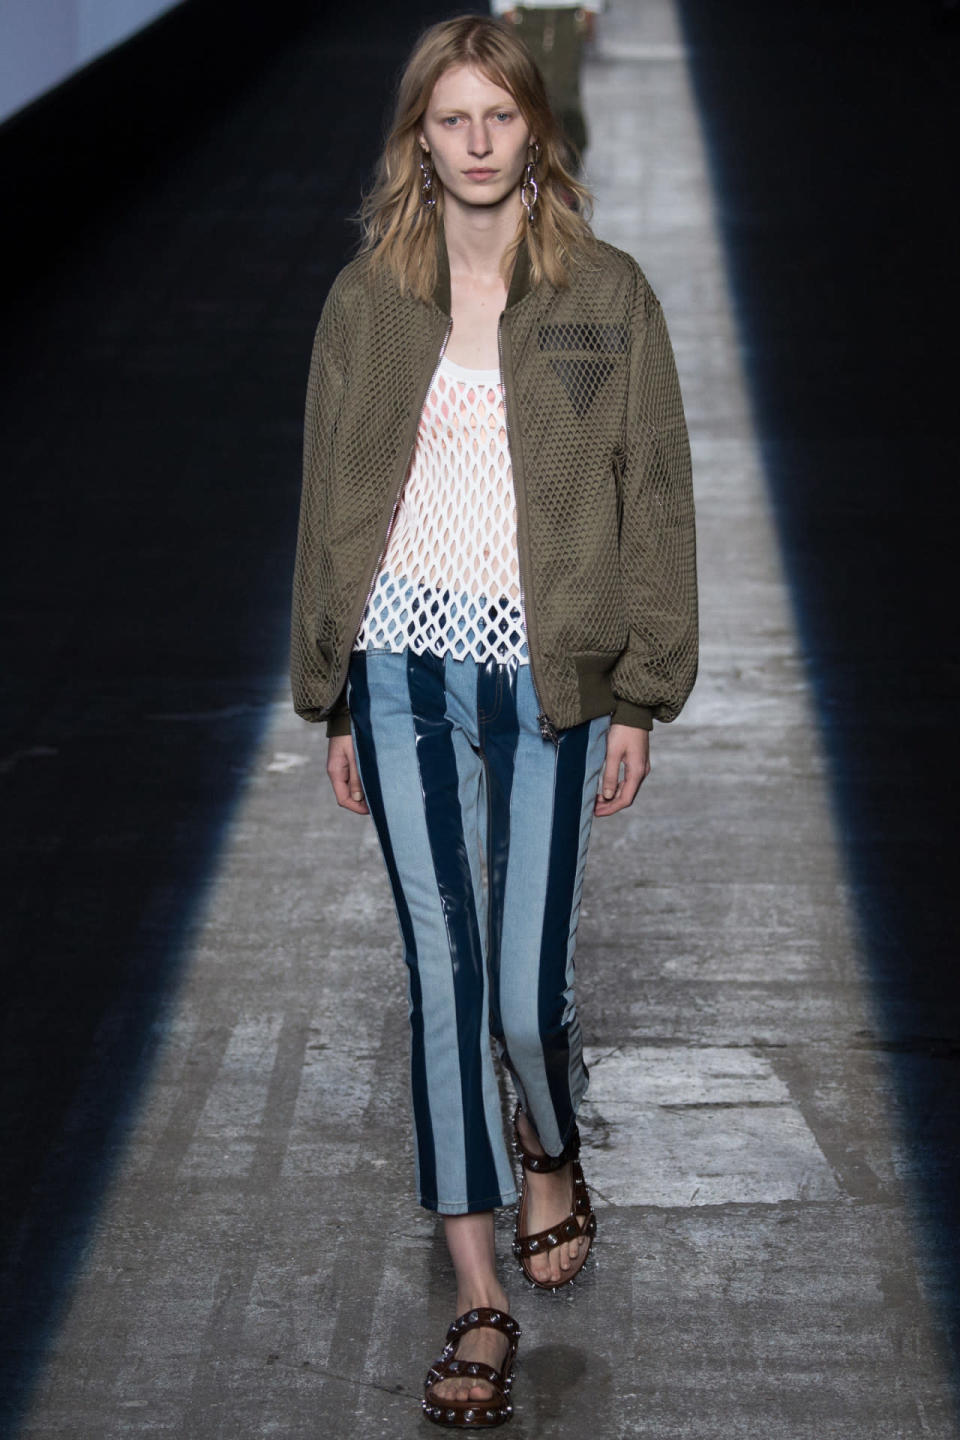 Alexander Wang showed his take on the bomber jacket for Spring 2016.